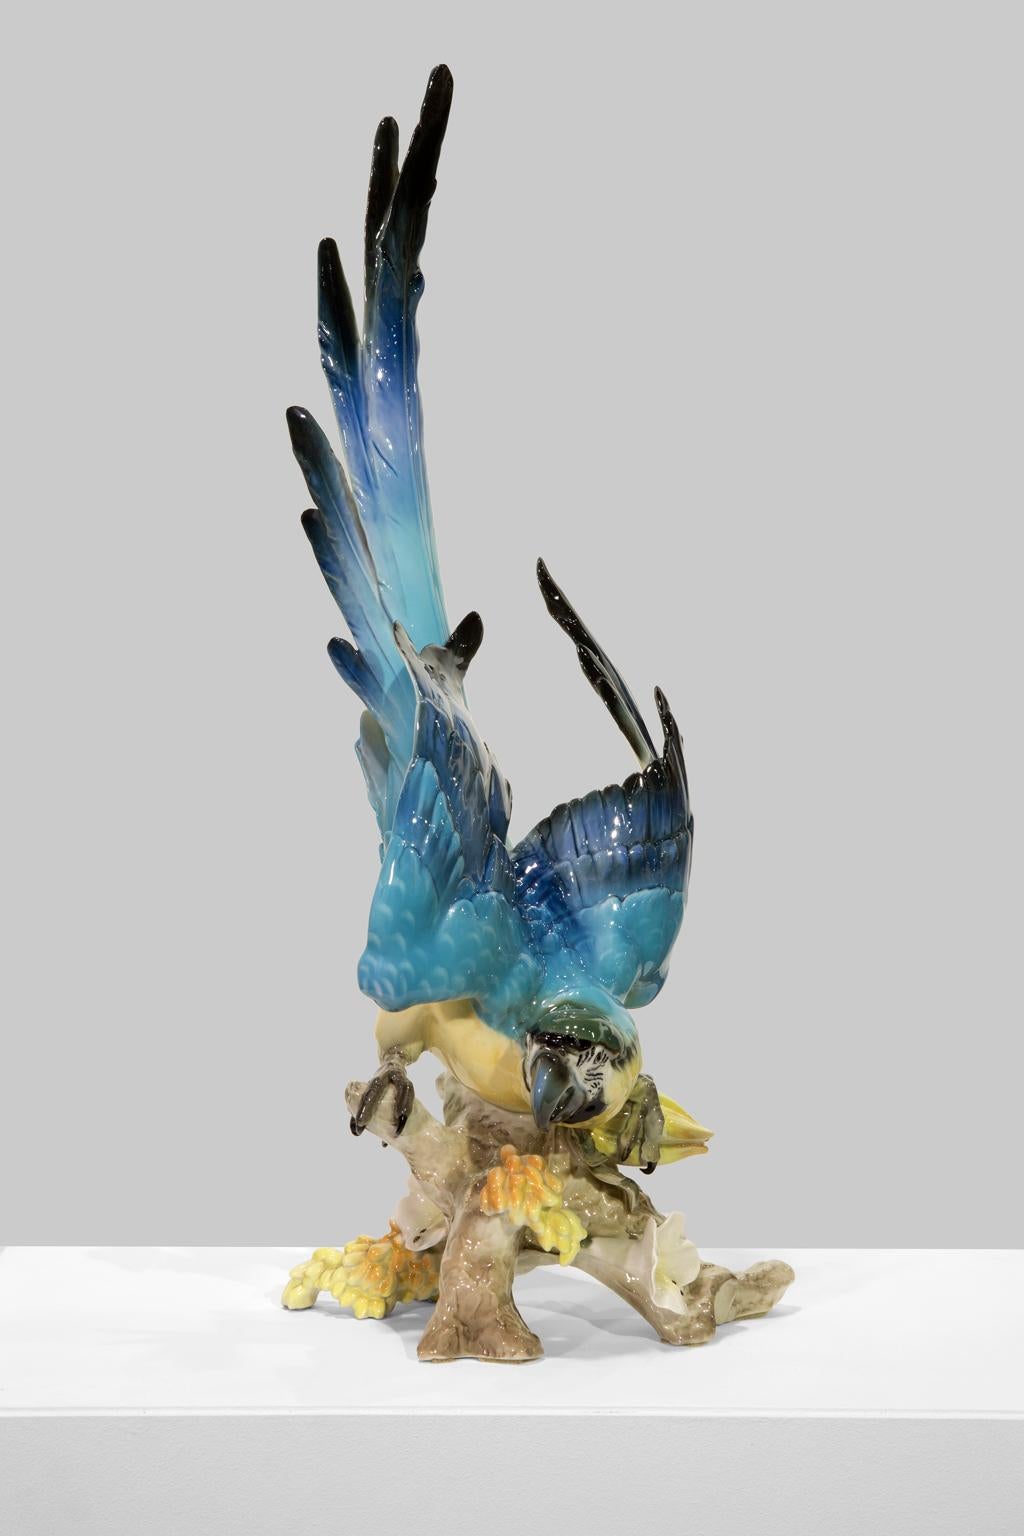 This gorgeous and large porcelain sculpture from Hutschenreuther porcelain is of a majestic blue-and-gold macaw, a neotropical parrot prized for its intelligence and striking colors, perched on a flowering branch, blue wings and tail outstretched.